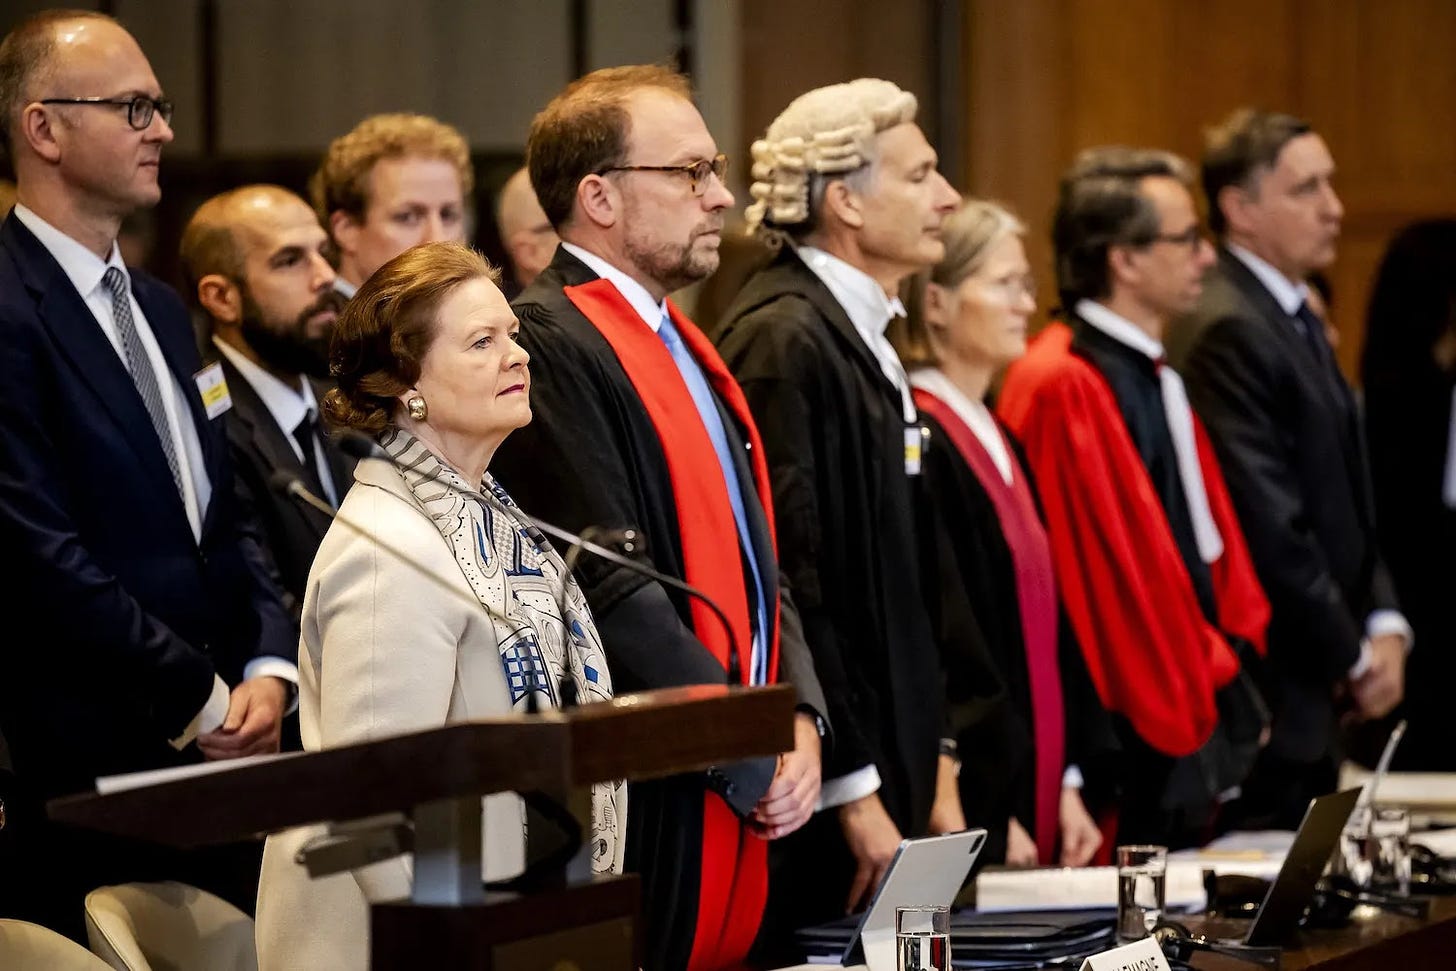 Germany’s legal advisor stands alongside lawyers at the International Court of Justice.